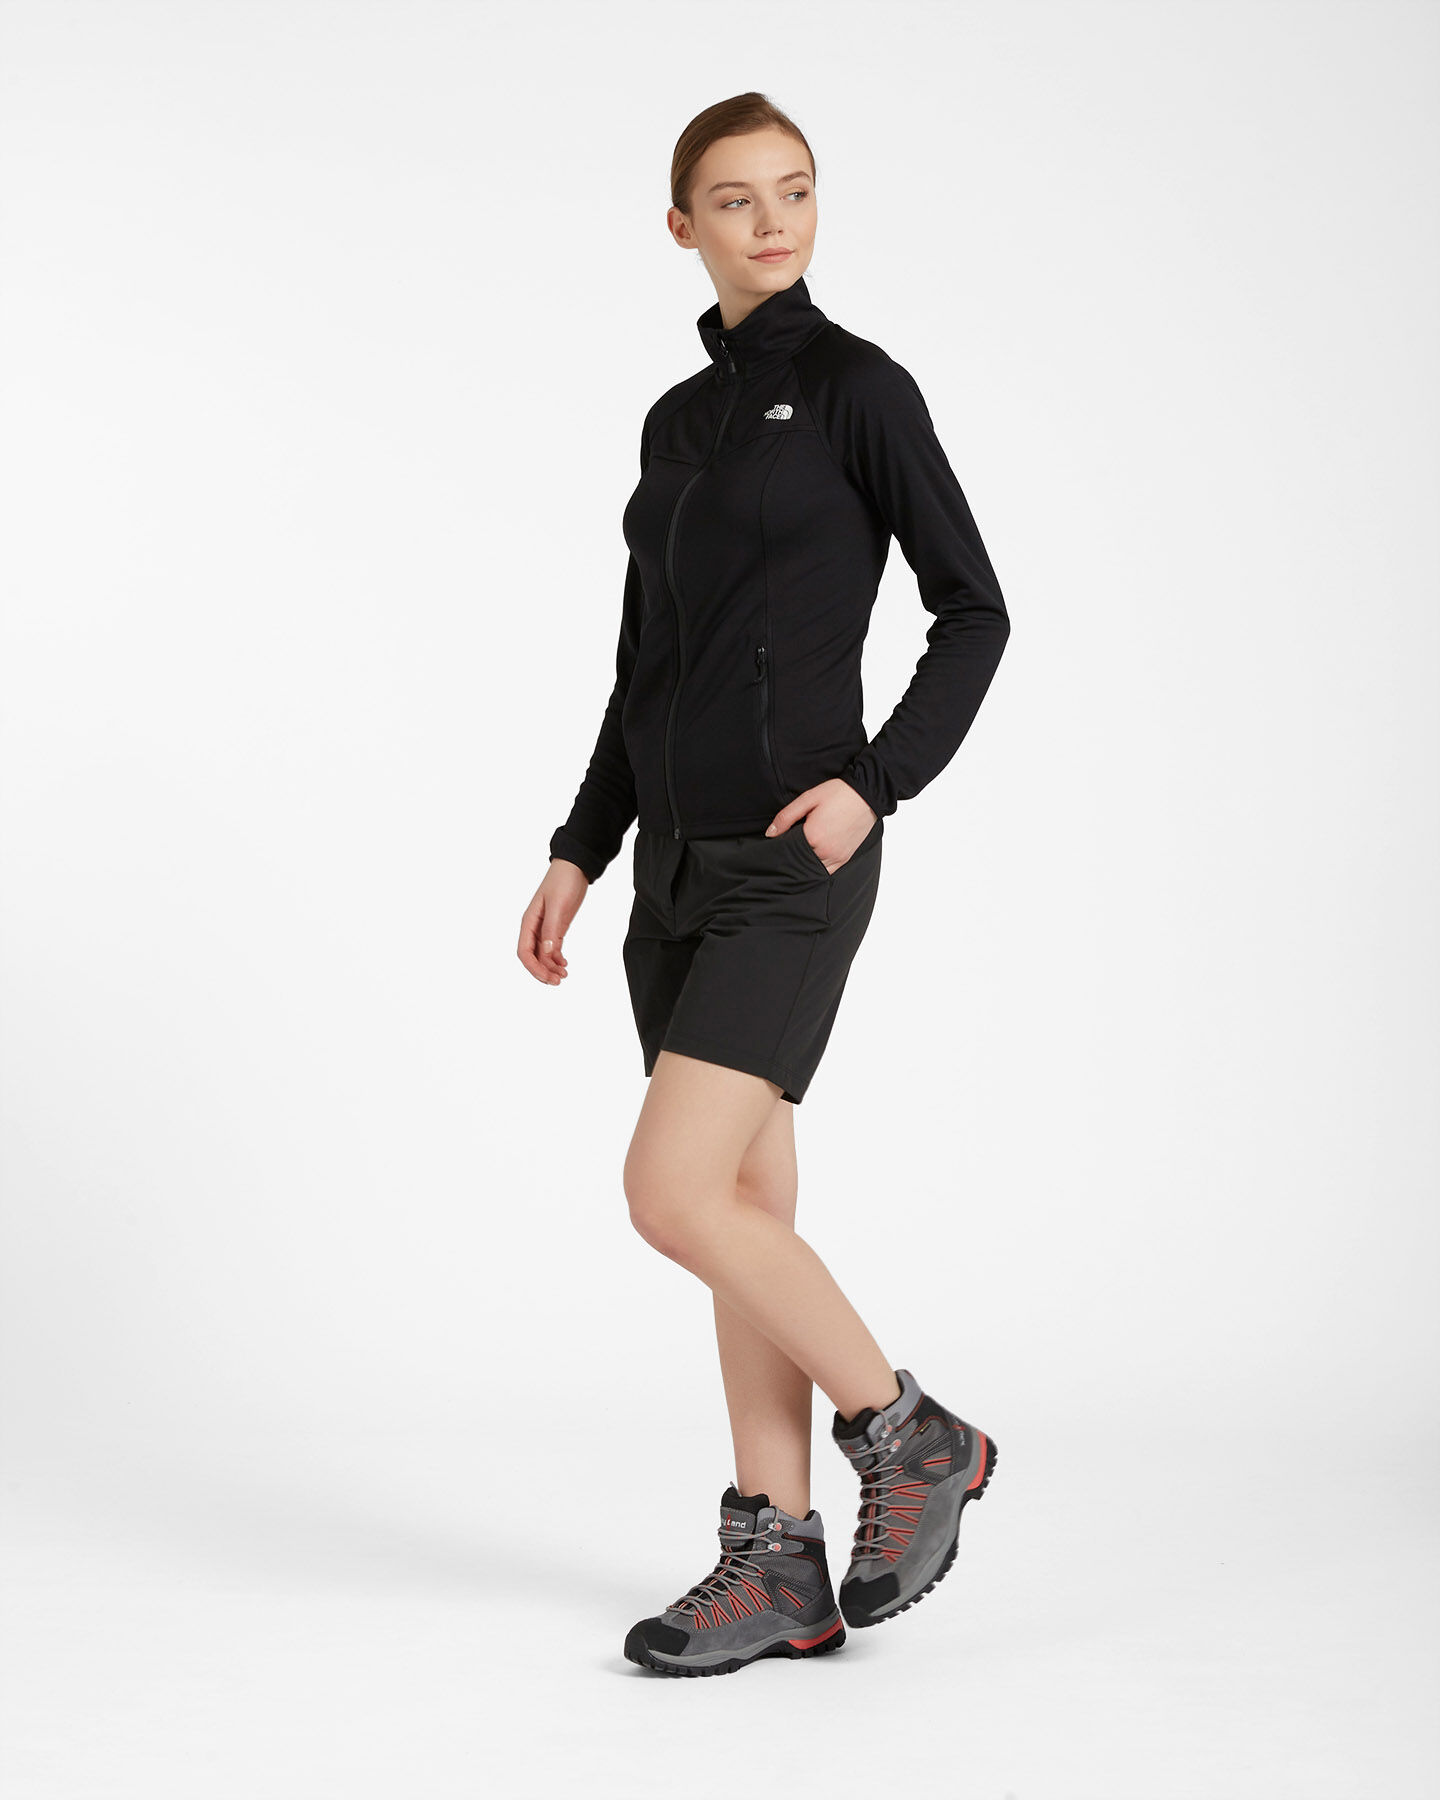  Pile THE NORTH FACE EXTENT III W S5181579|JK3|XS scatto 3